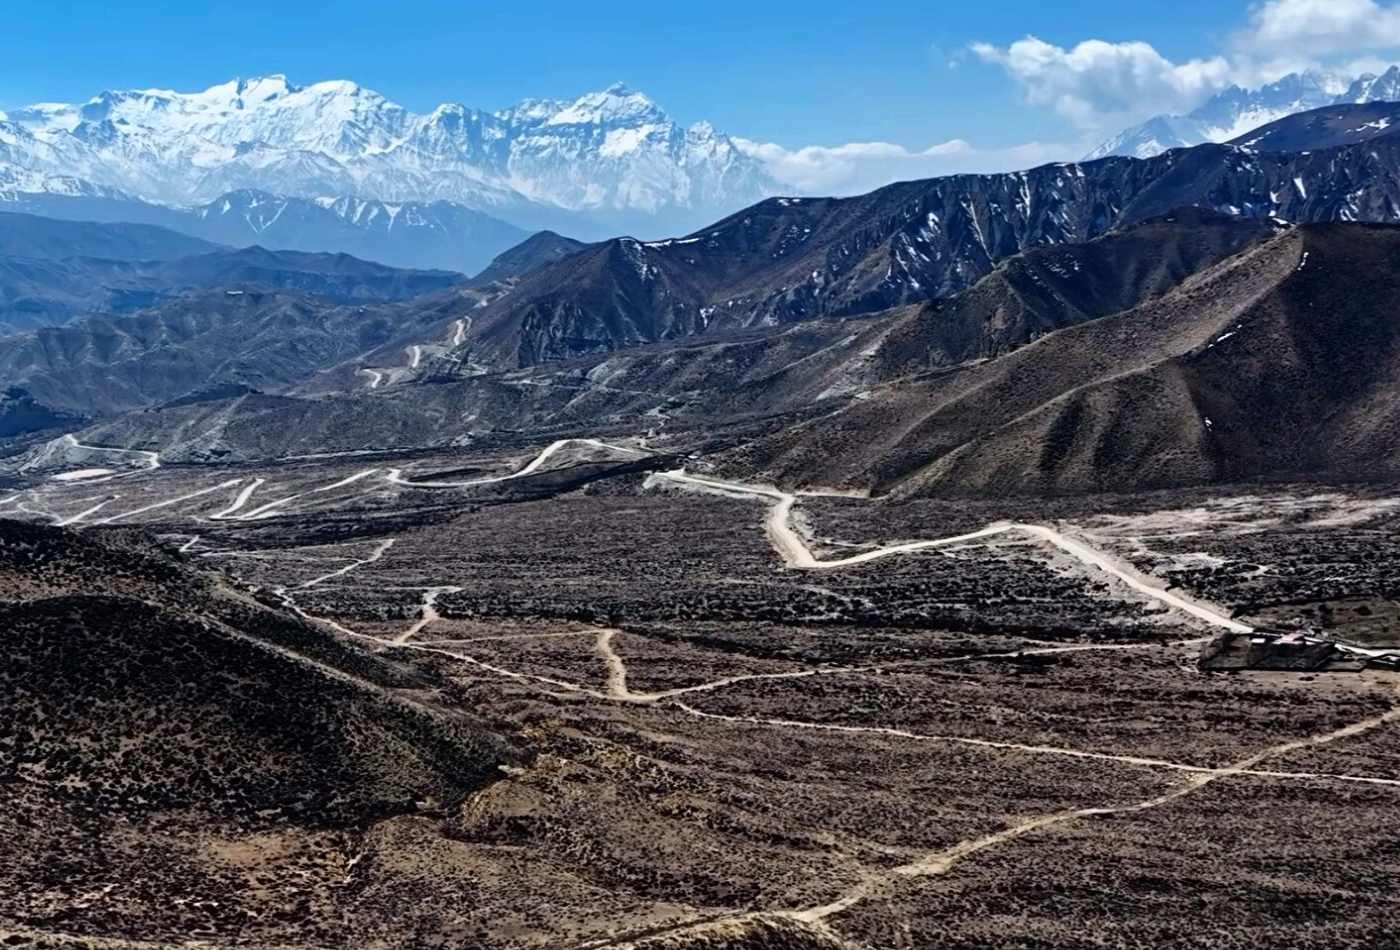 A winding road leading to the town of Lo-Manthang with the majestic Mt. Nilgiri and Tilicho Peak towering in the background.